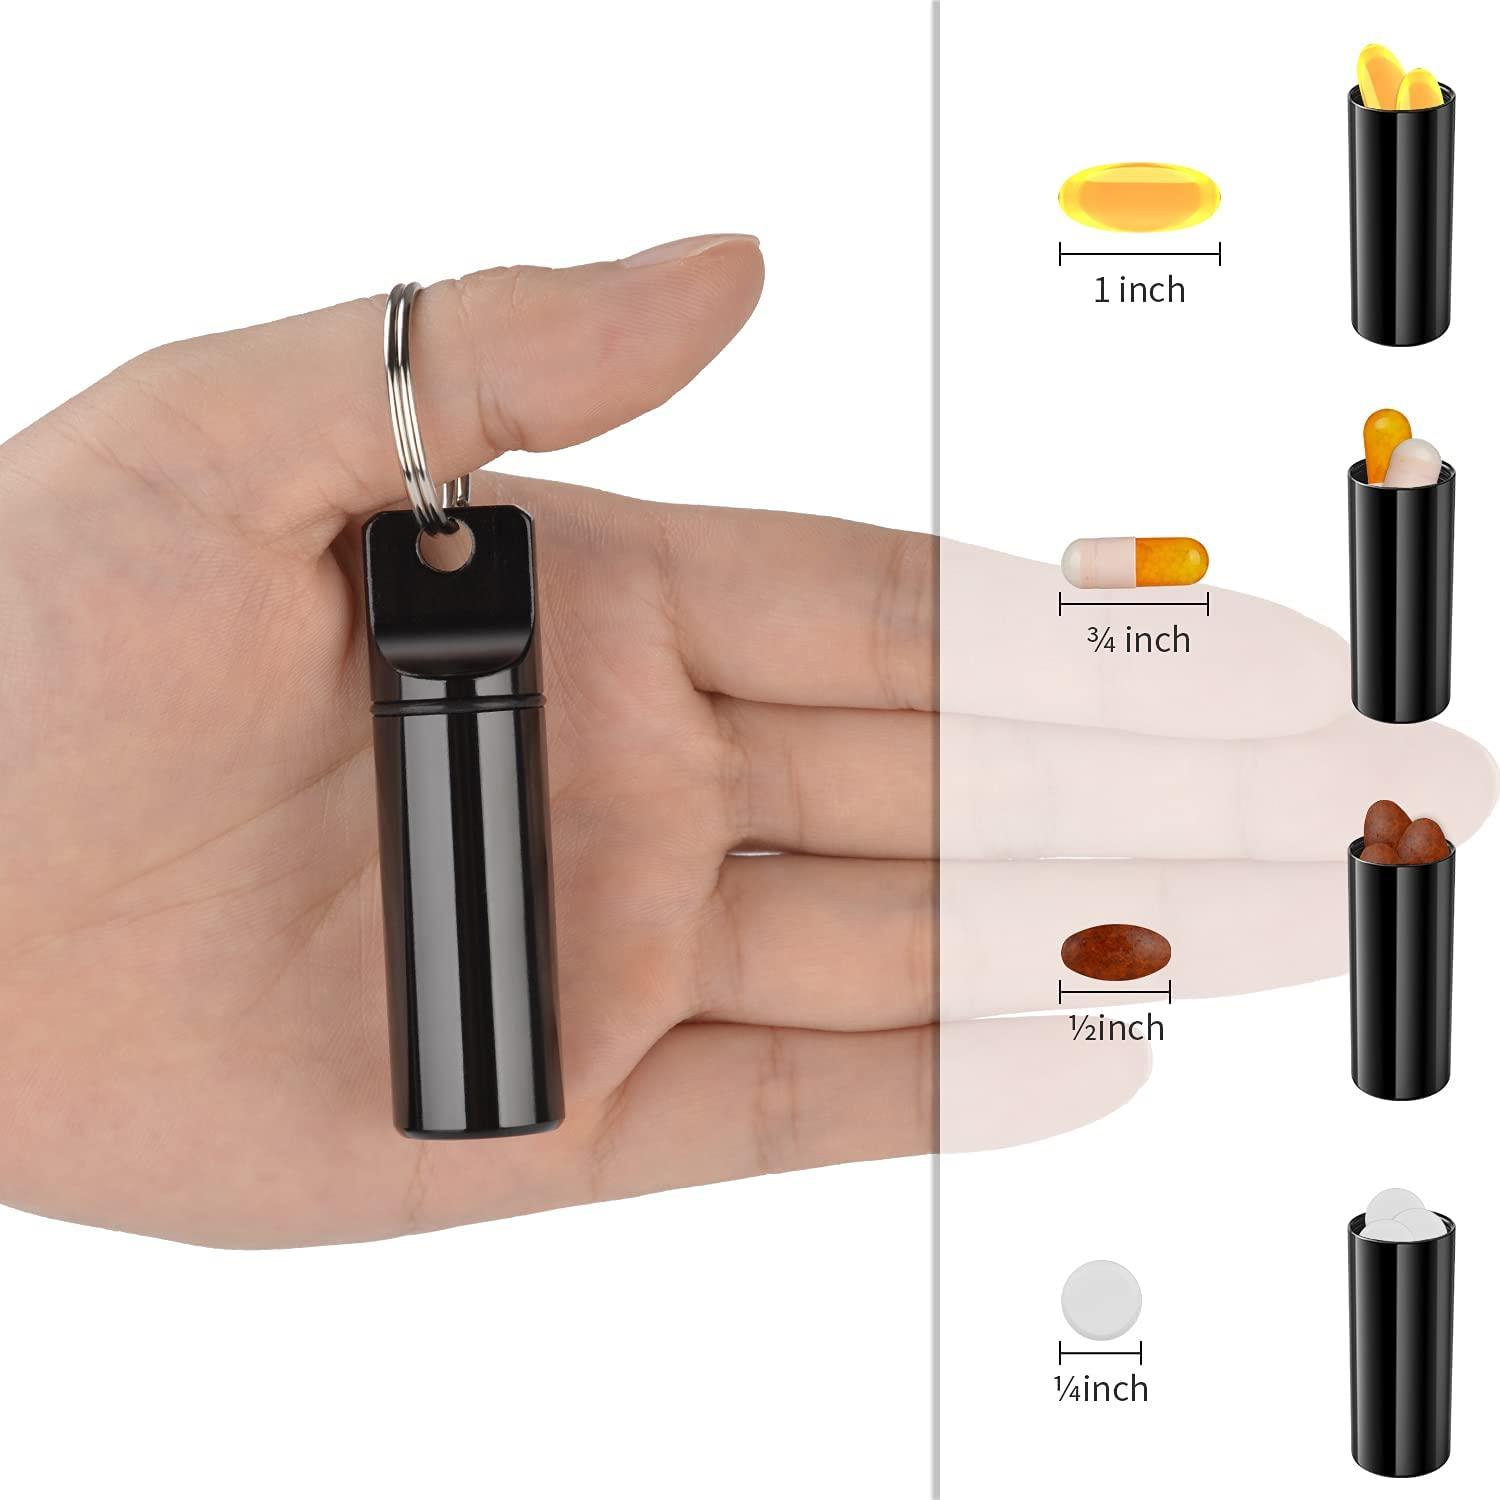 Portable Key Chain Mini Whey Protein Shaker Holder Container FREE SHIPPING  to Uk 